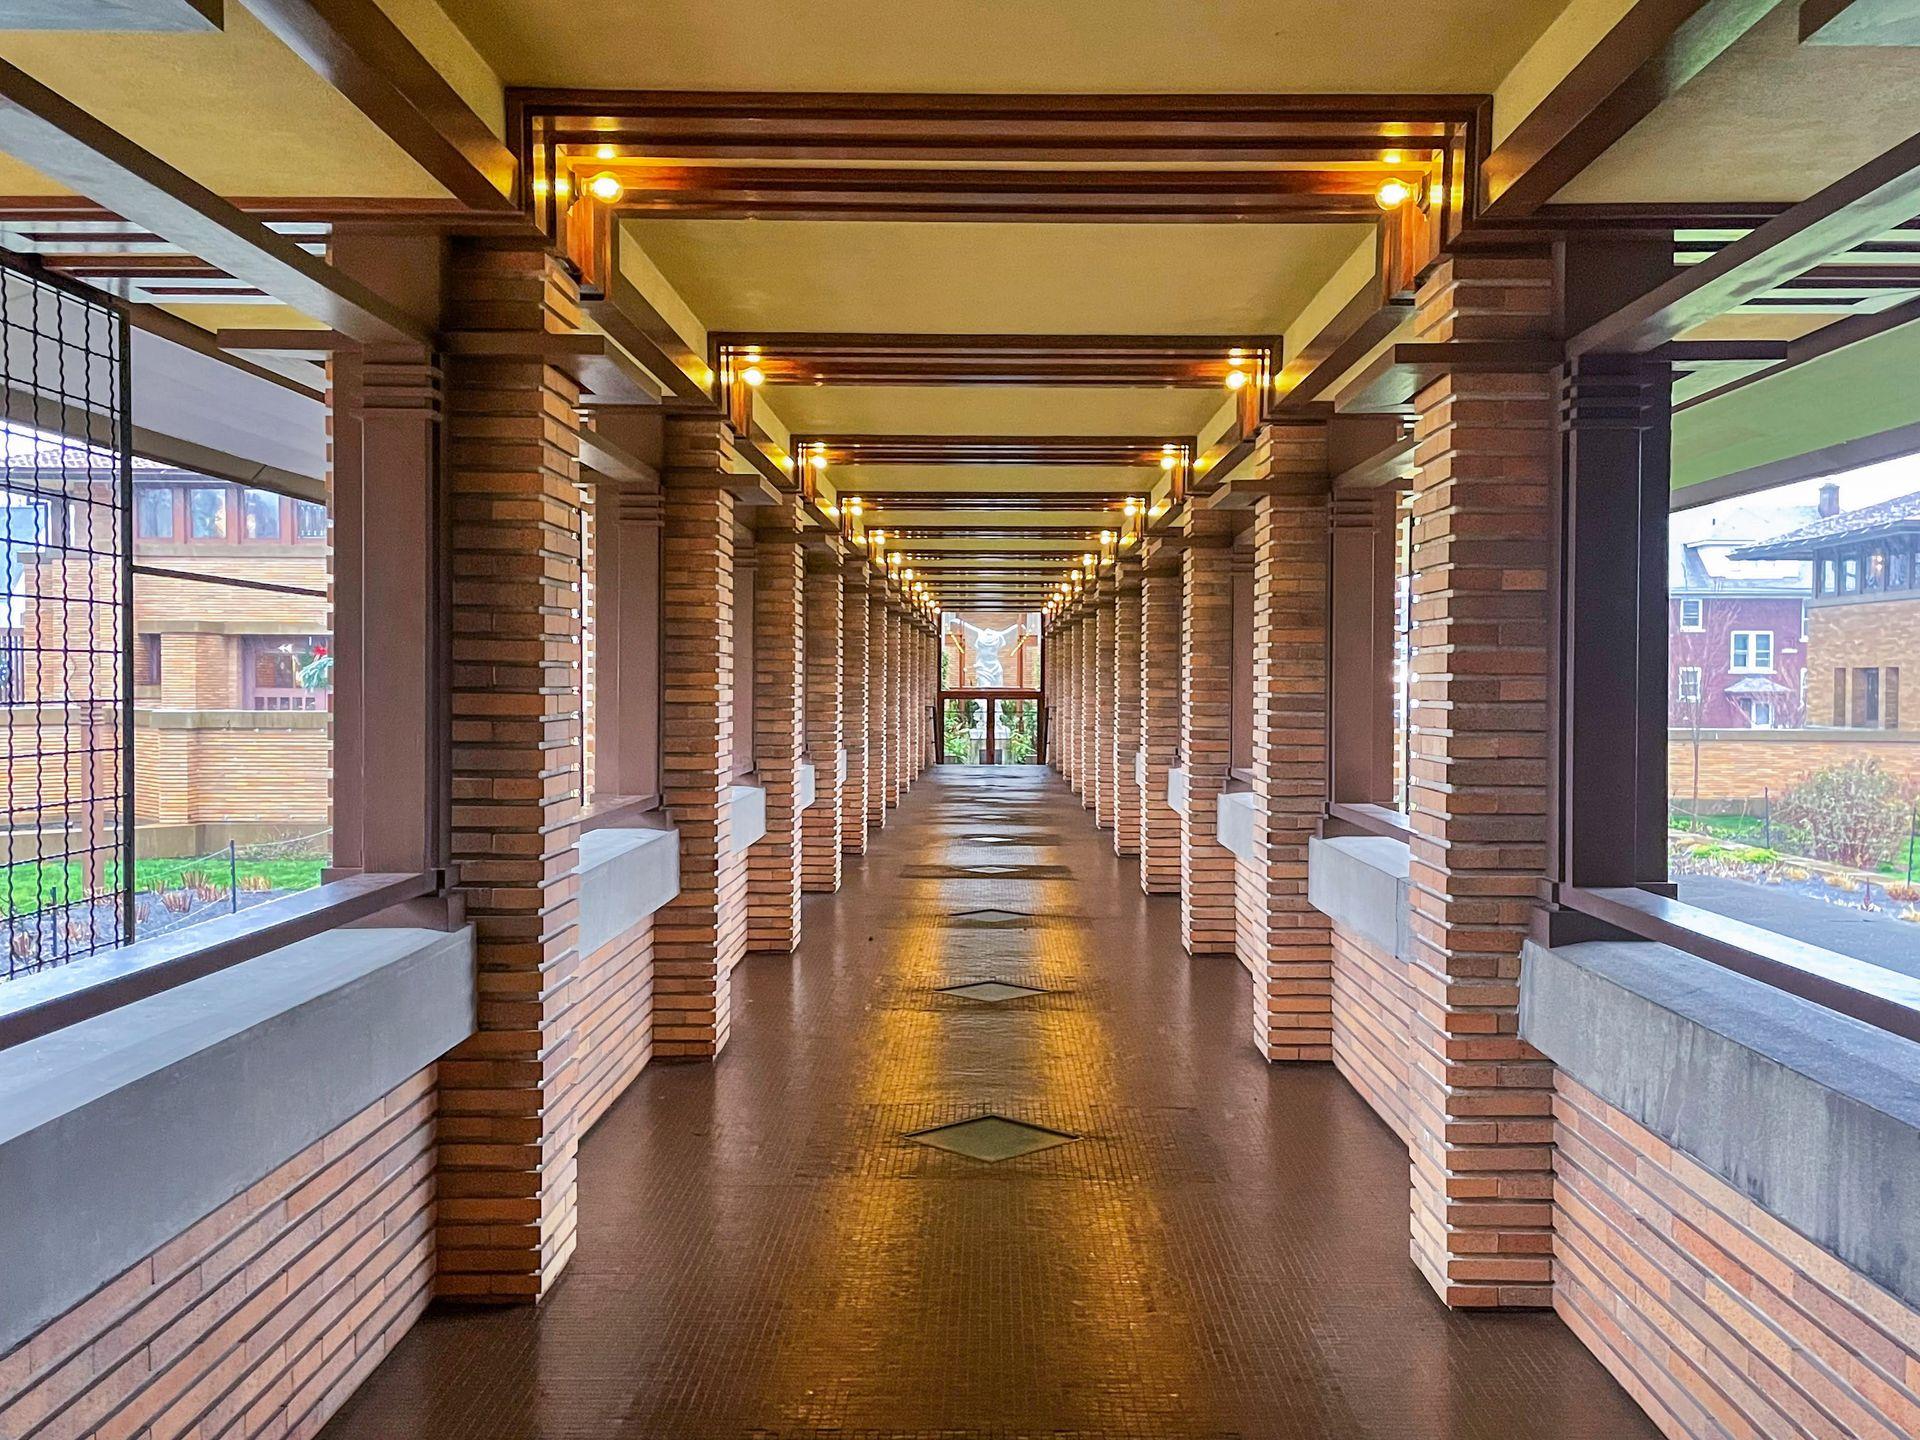 A partially outdoor hallway lined with brick pillars. At the end of the hallway is a white statue.